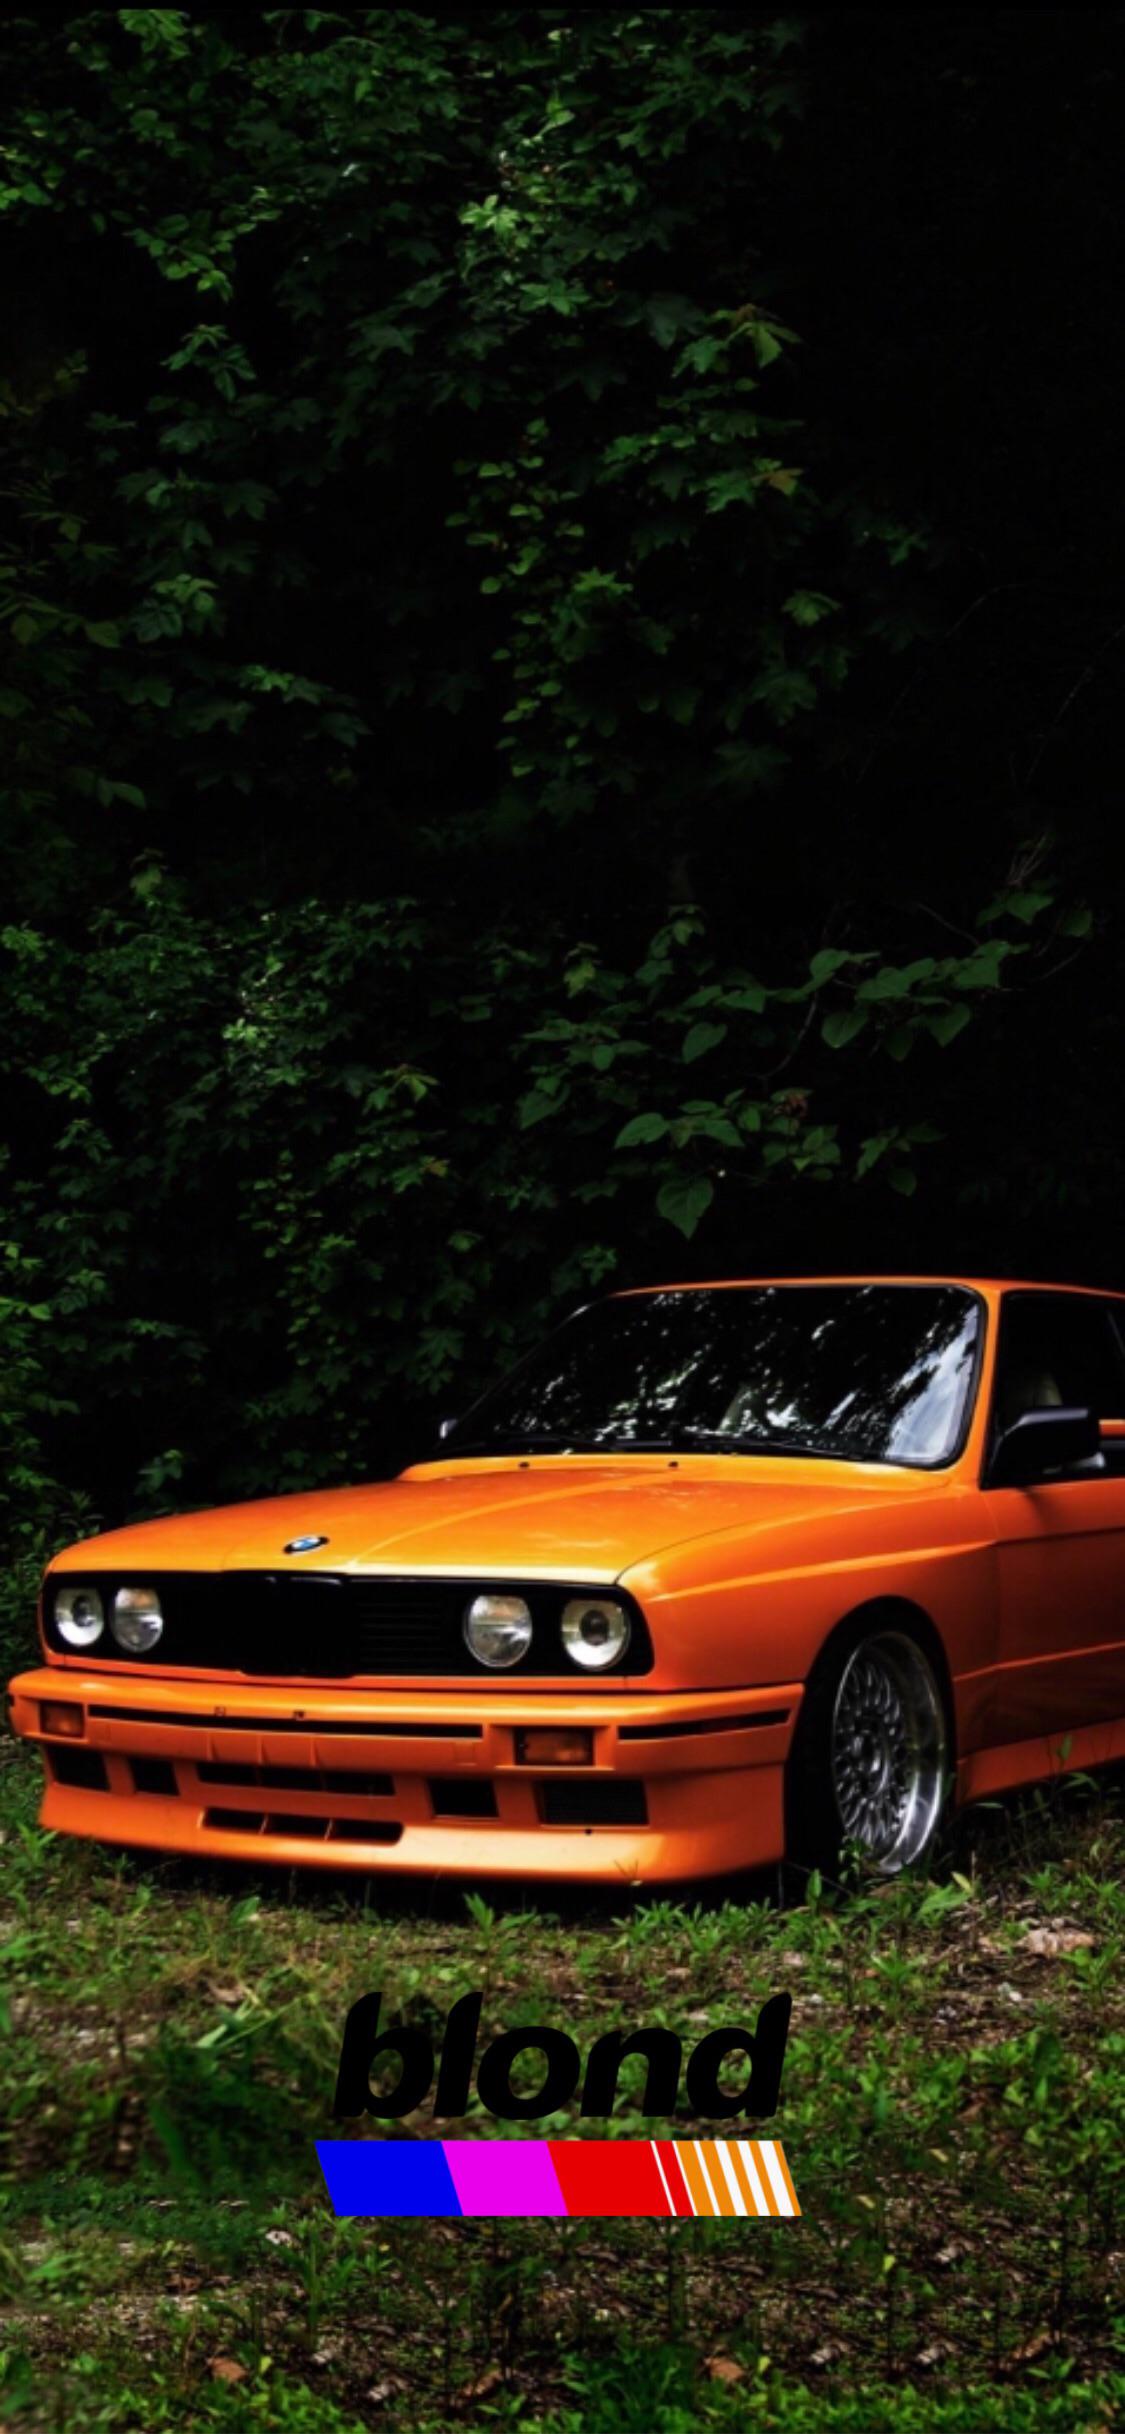 This BMW E30 Frank Ocean wallpaper, I added the Blond text in the bottom and the stripes he uses, couldn't find the original photographer but I'll comment if I do: iphonexwallpaper